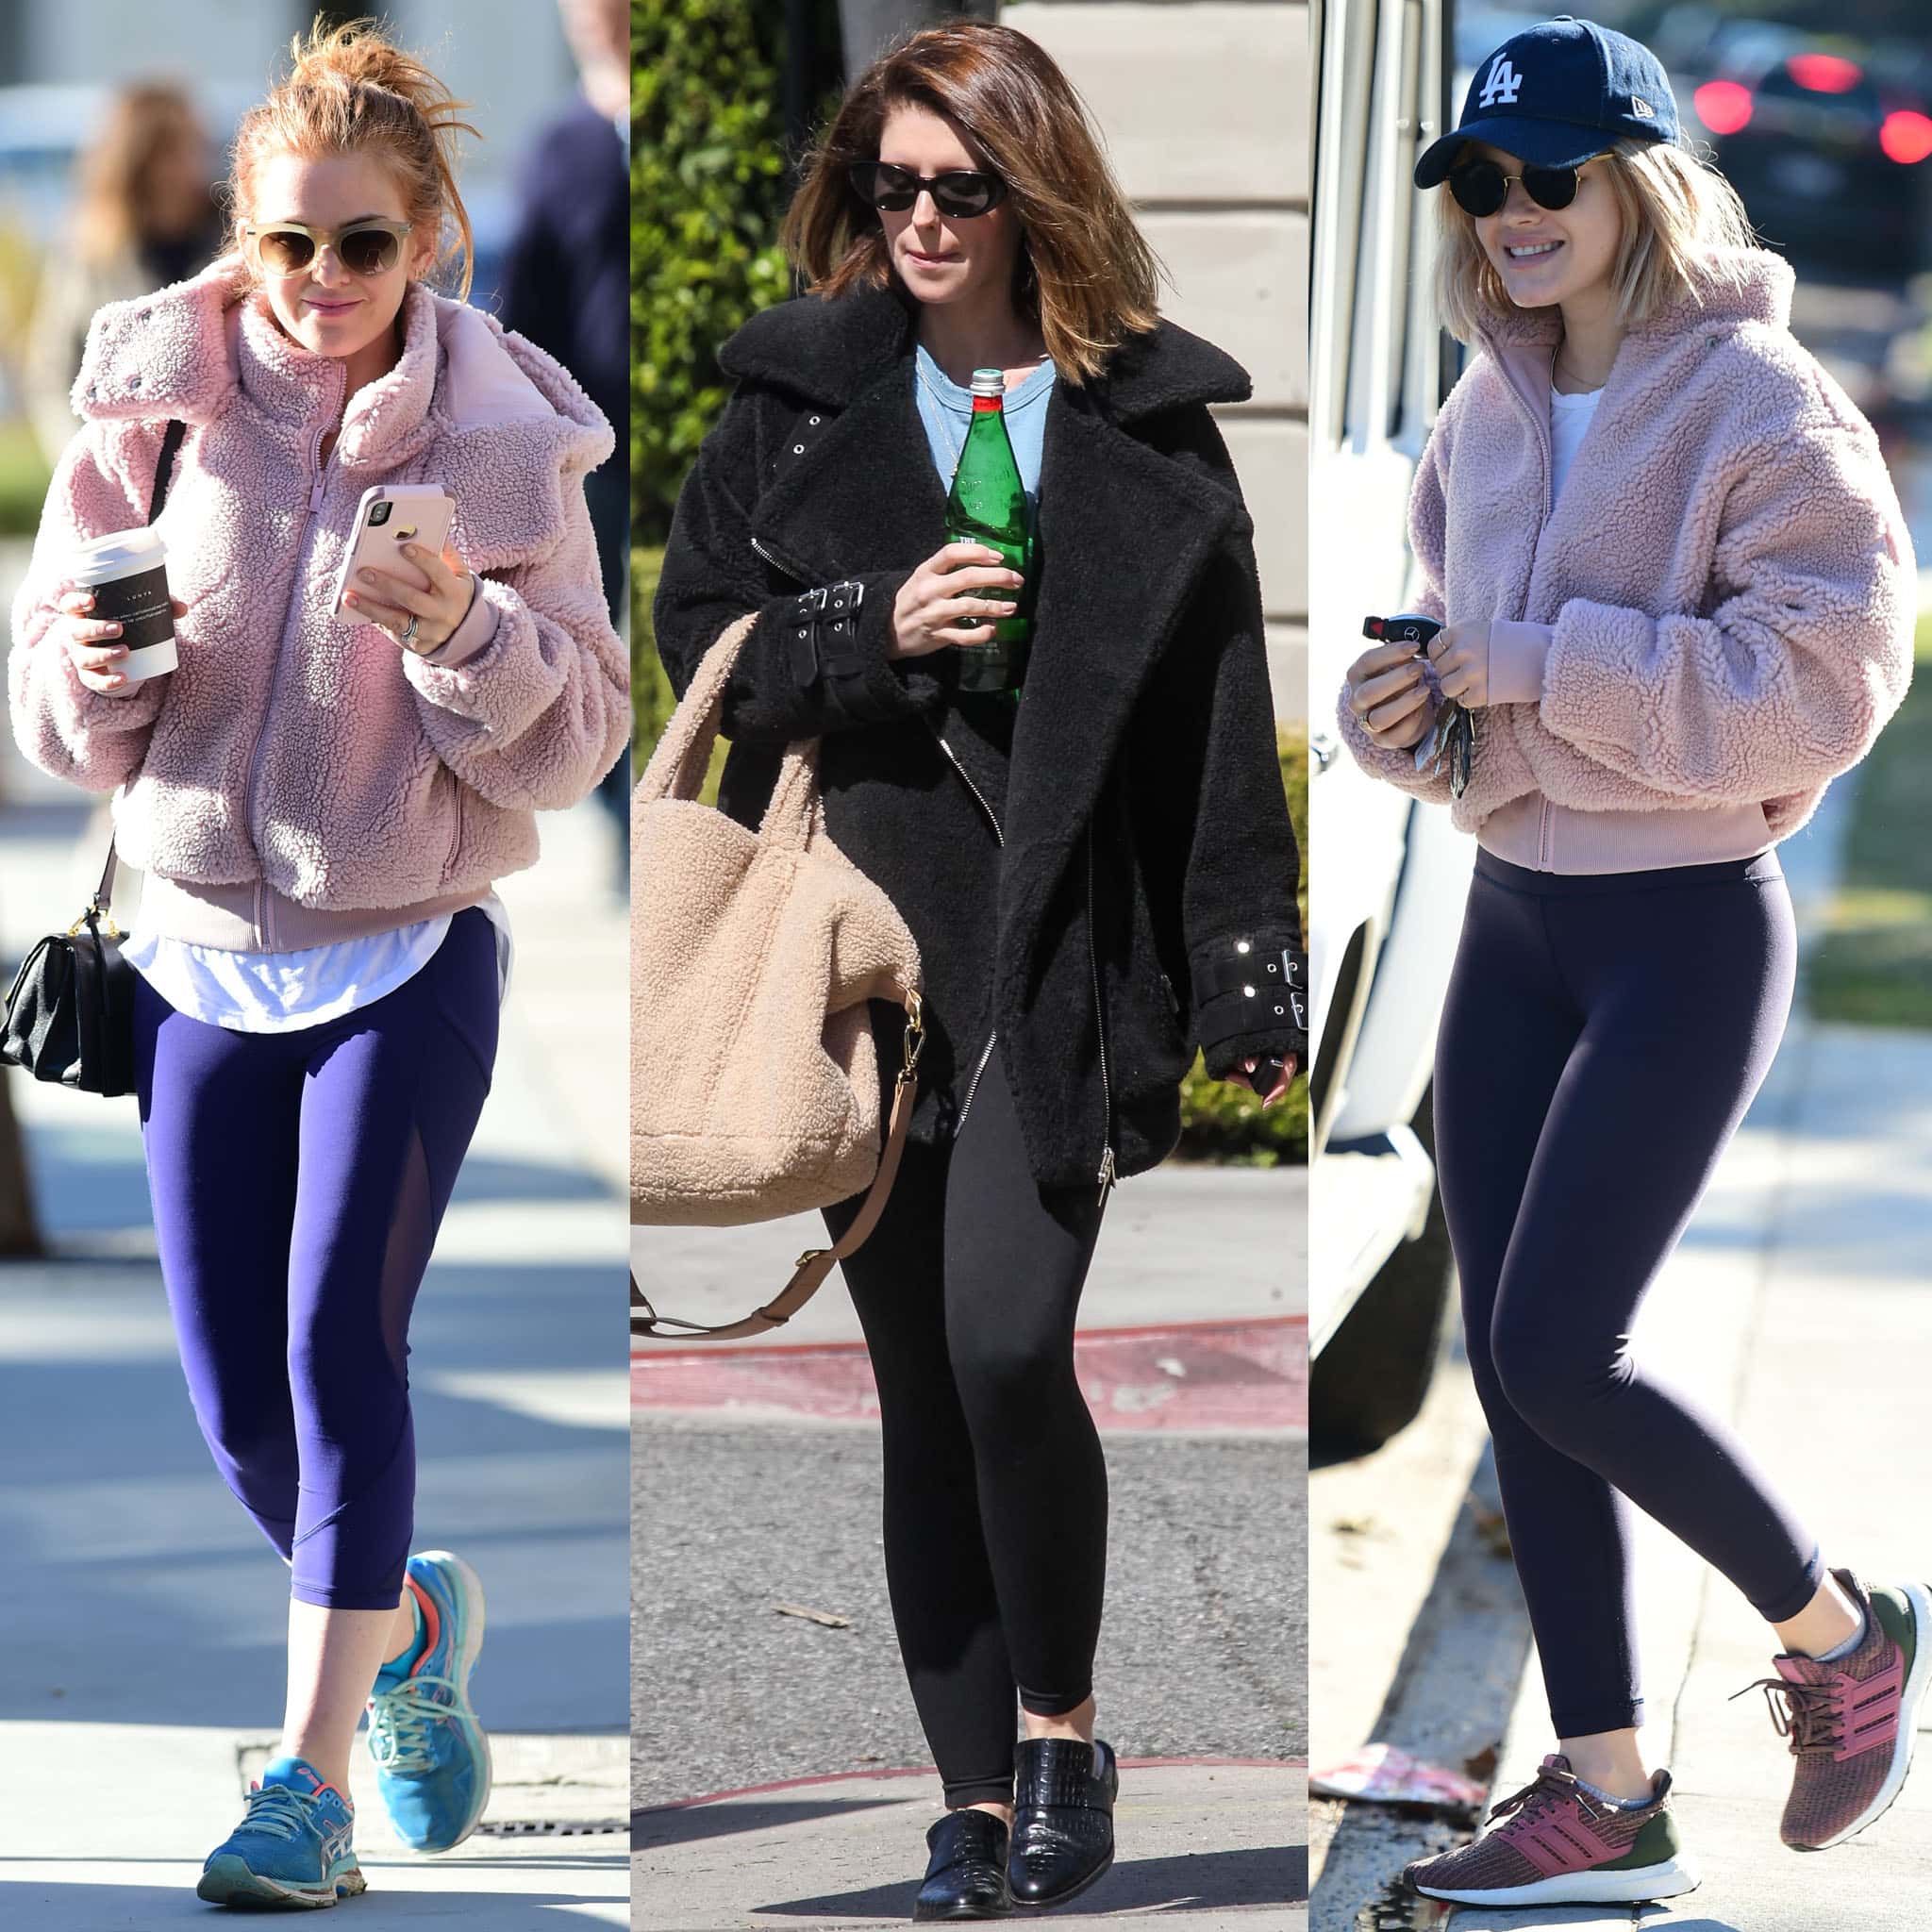 Celebrity Style Spotlight: Isla Fisher, Katherine Schwarzenegger, and Lucy Hale effortlessly combine comfort and chic, pairing their cozy fleece jackets with sleek leggings for a casual yet stylish look